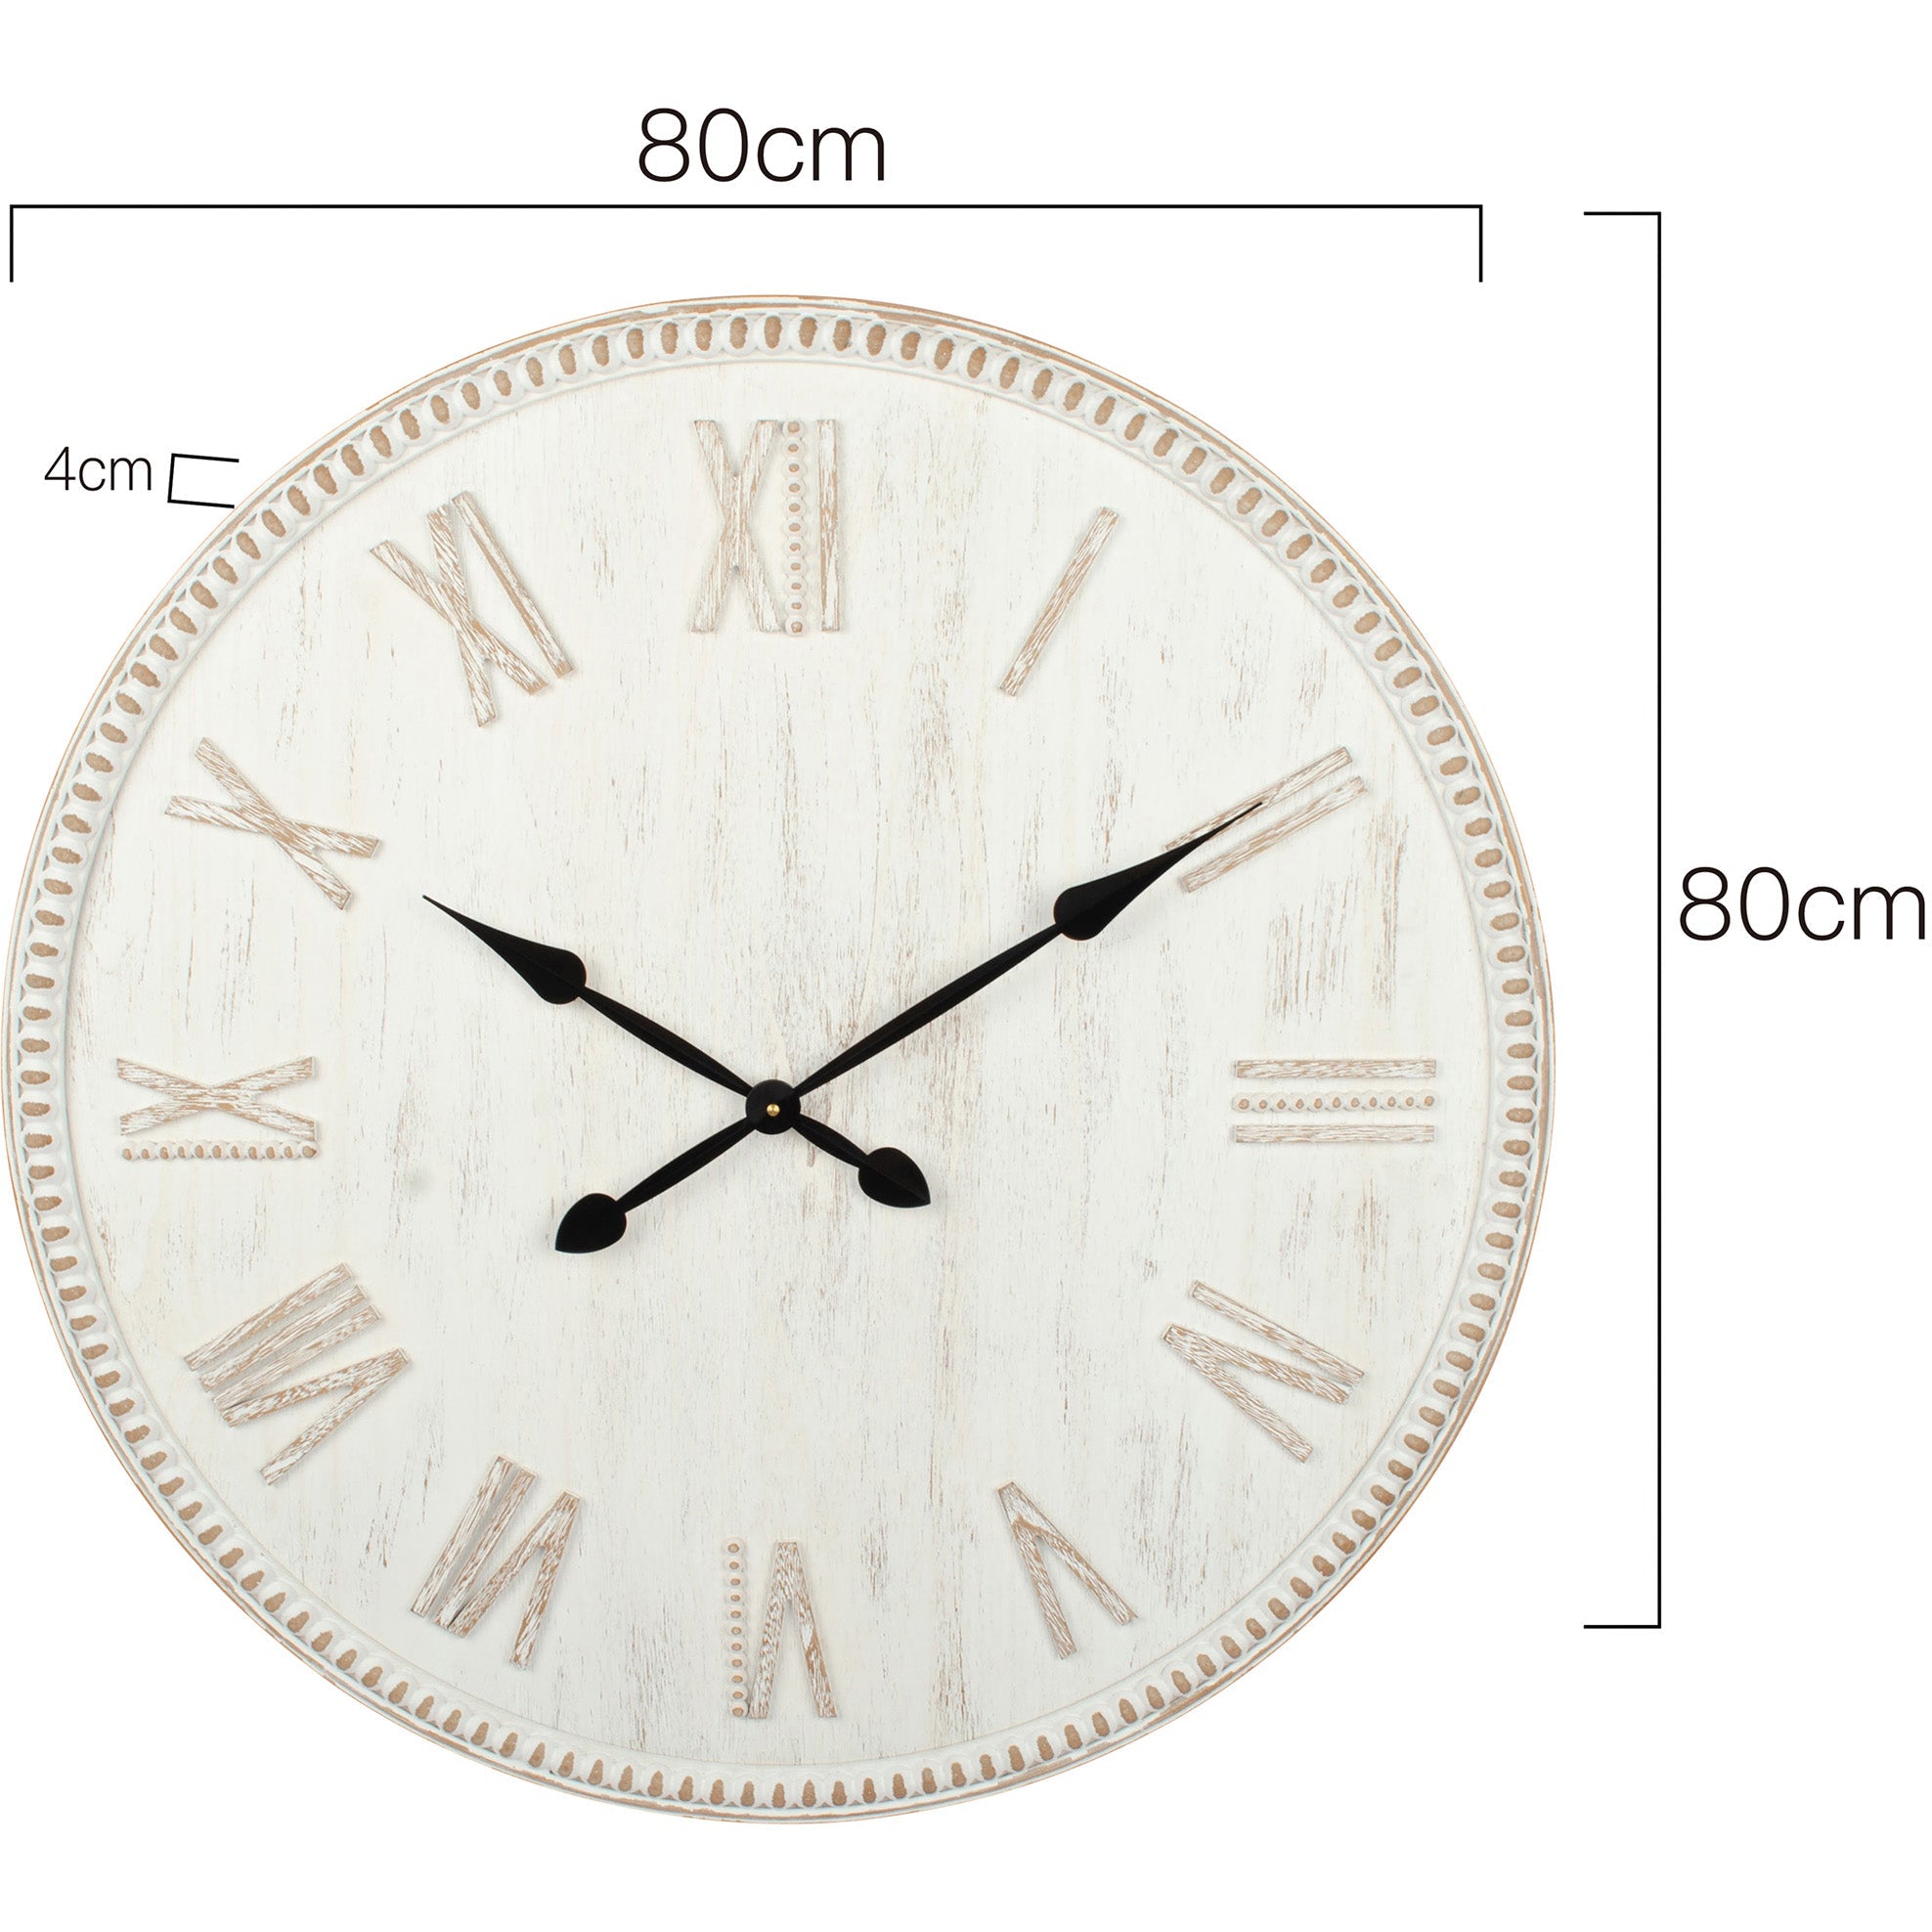 Large Round Metal Wall Clock: Timeless Elegance for Your Wall